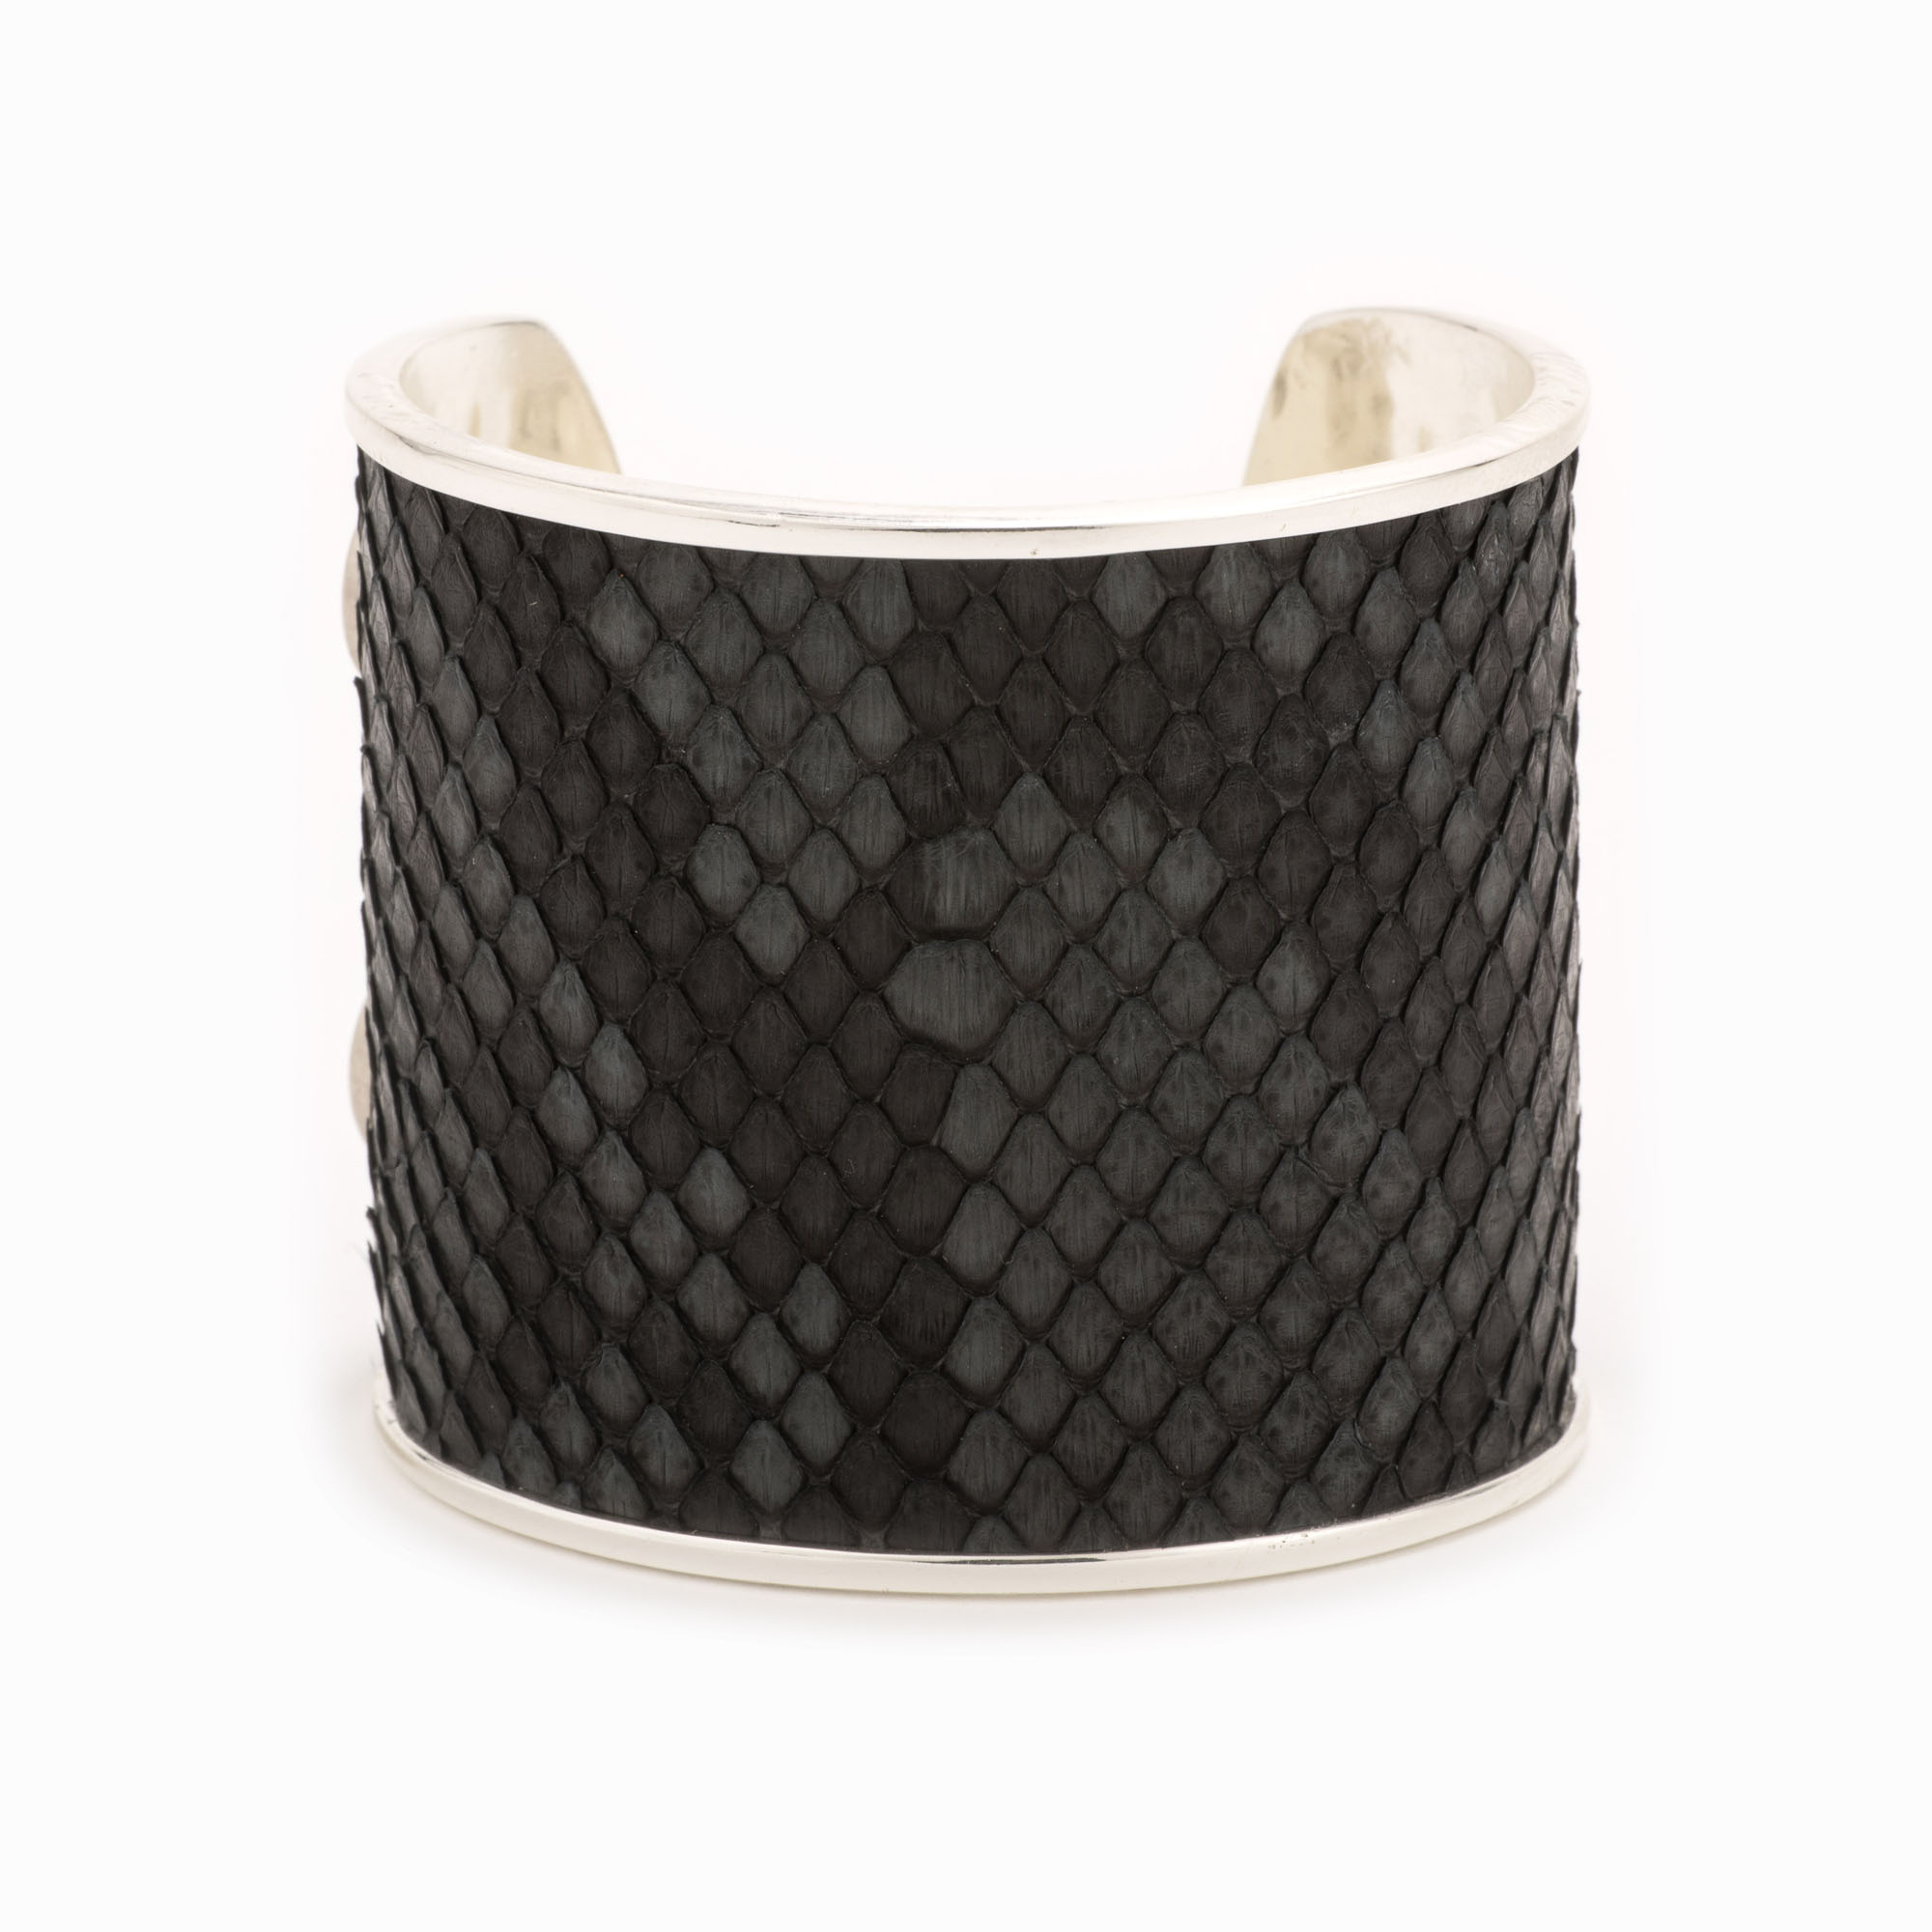 Featured image for “Large Charcoal Silver Cuff”